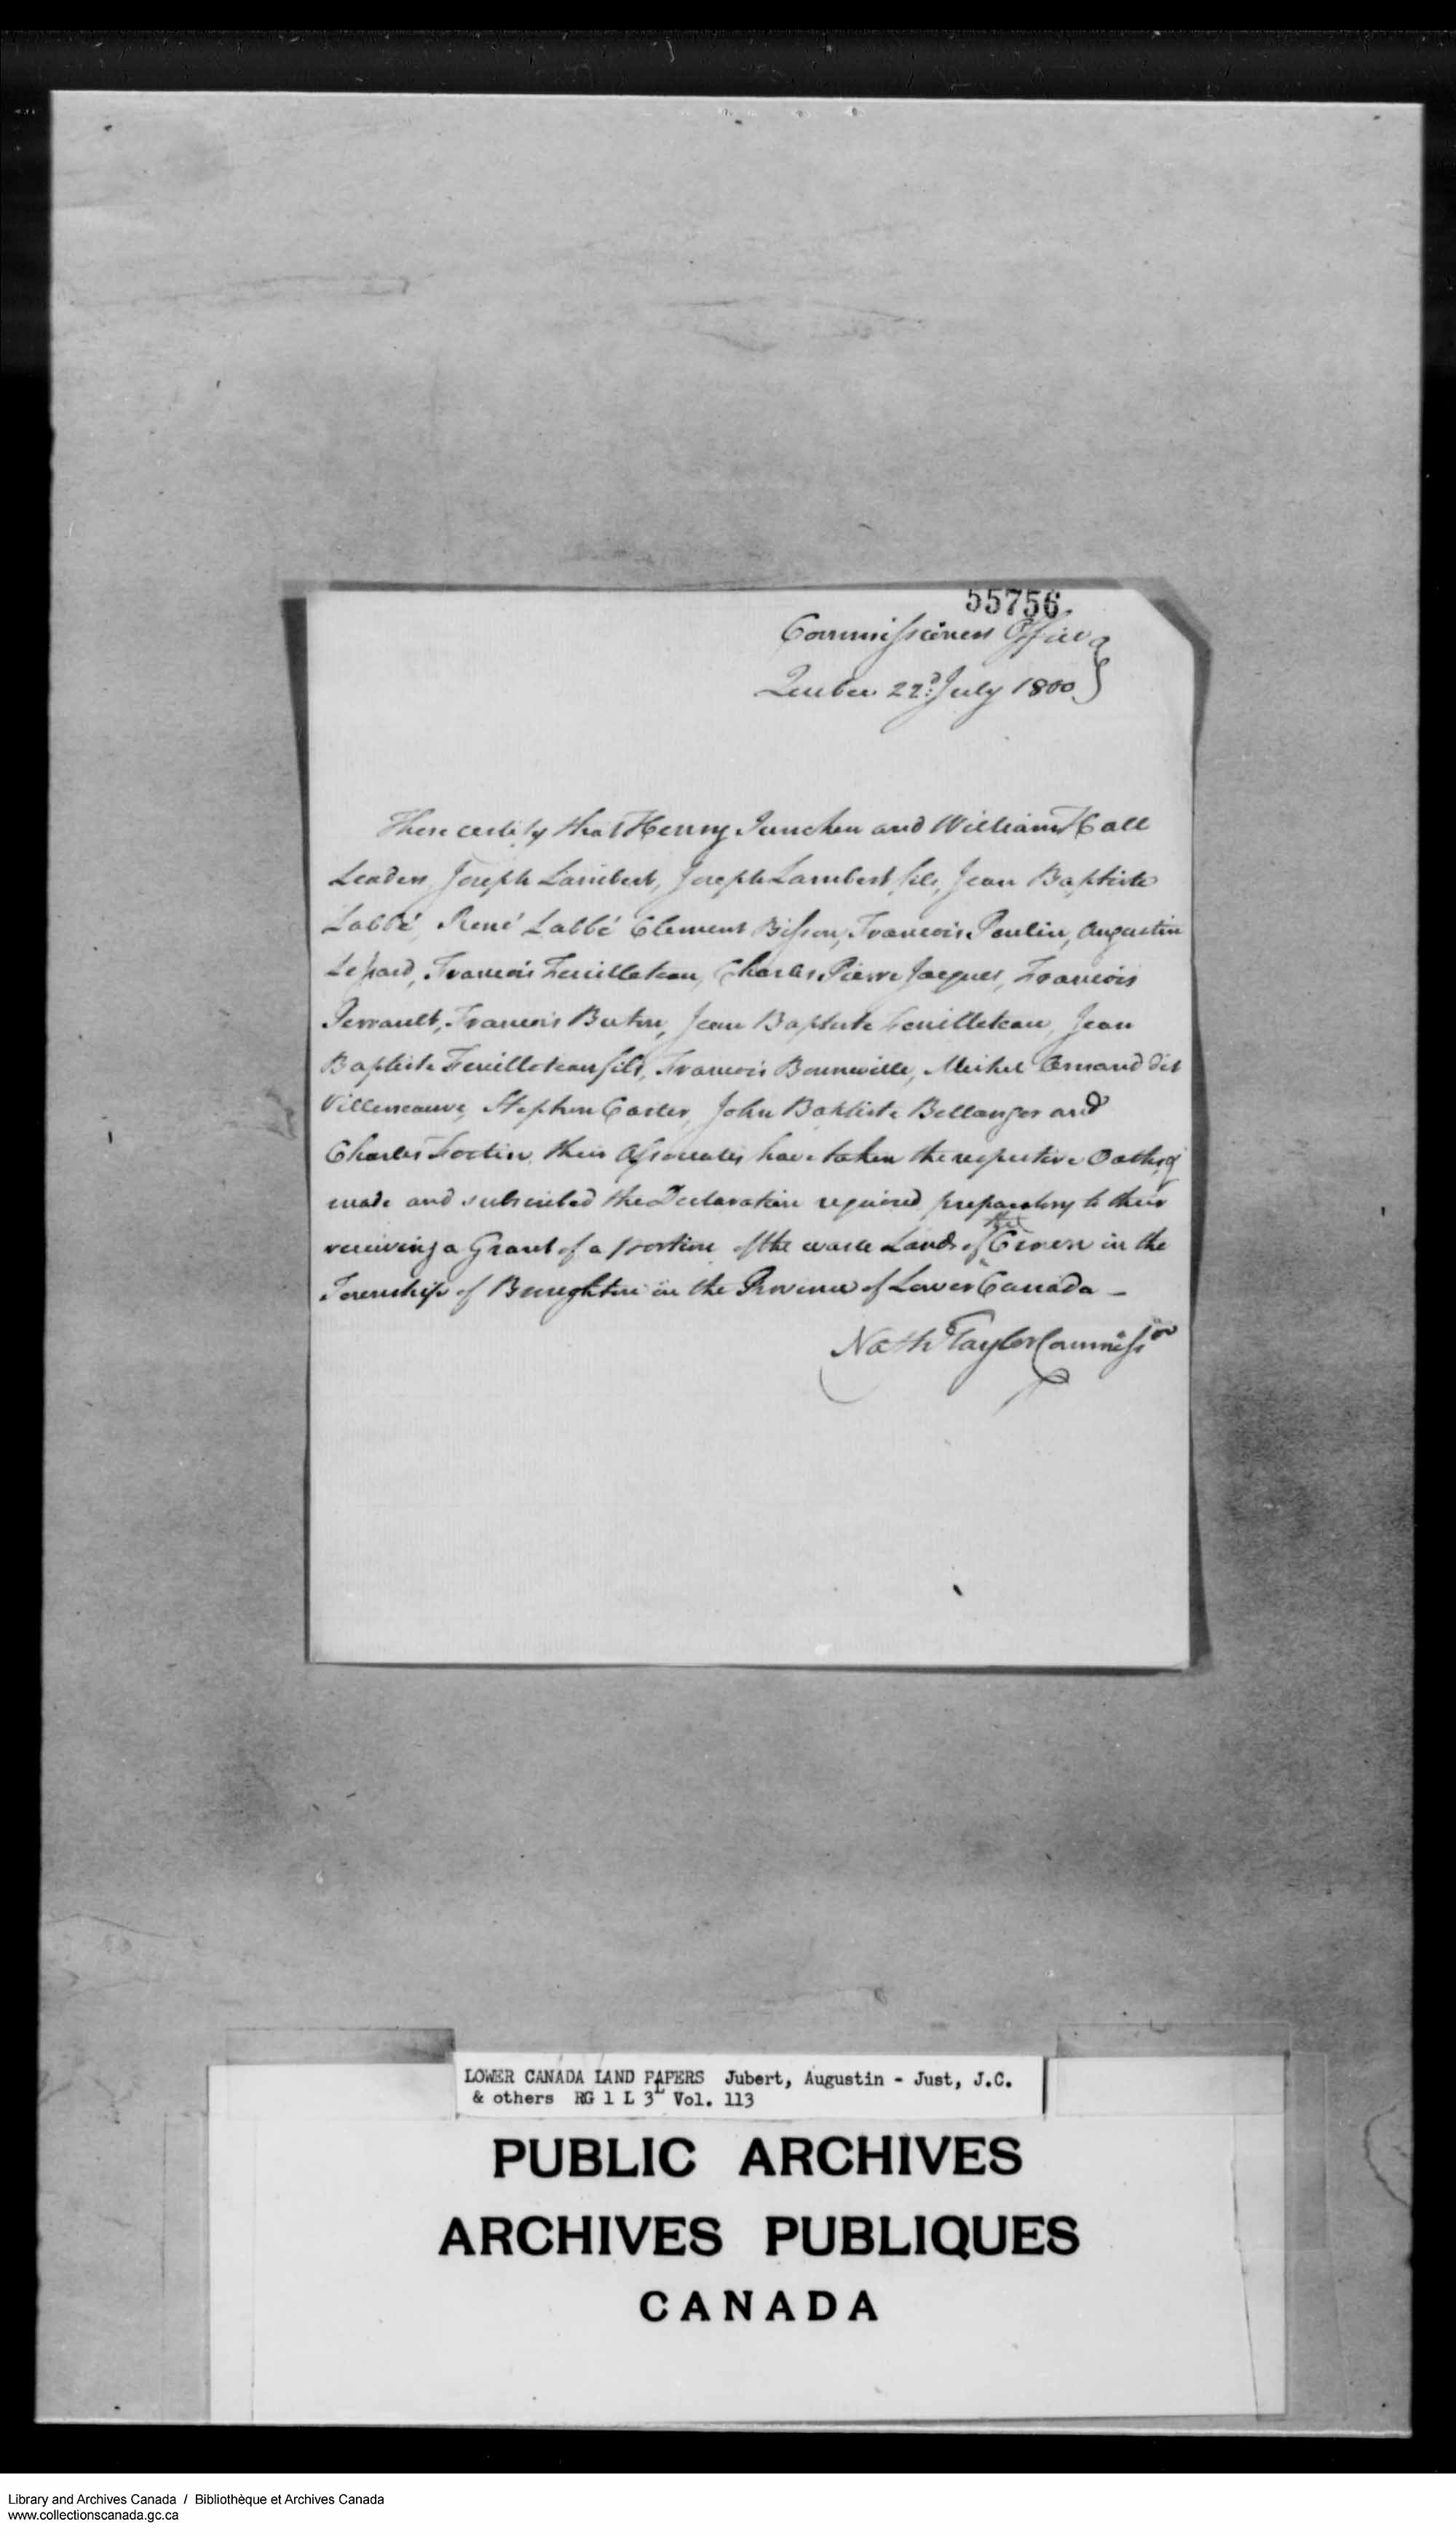 Digitized page of  for Image No.: e008700244